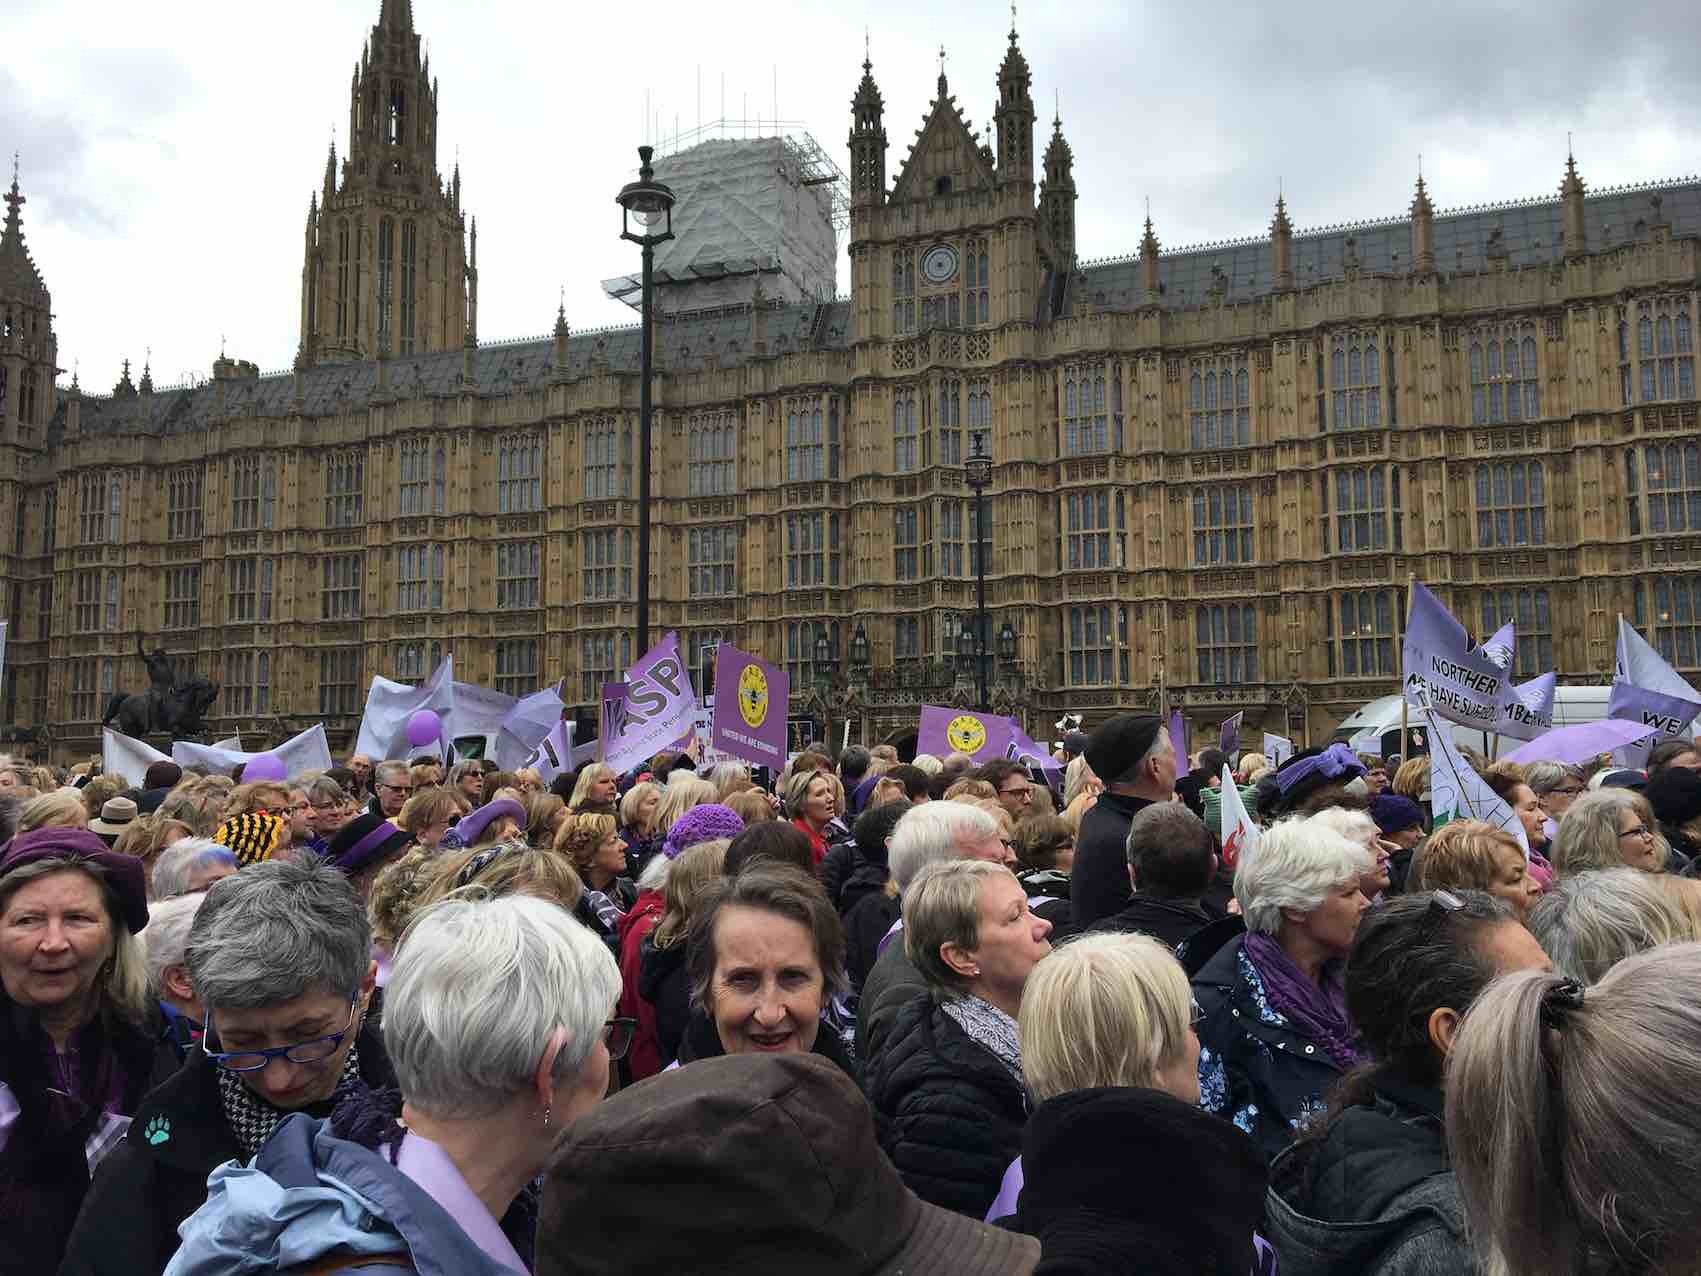 Waspi women marched on Westminster last month to protest against the government’s decision to increase the female state pension age